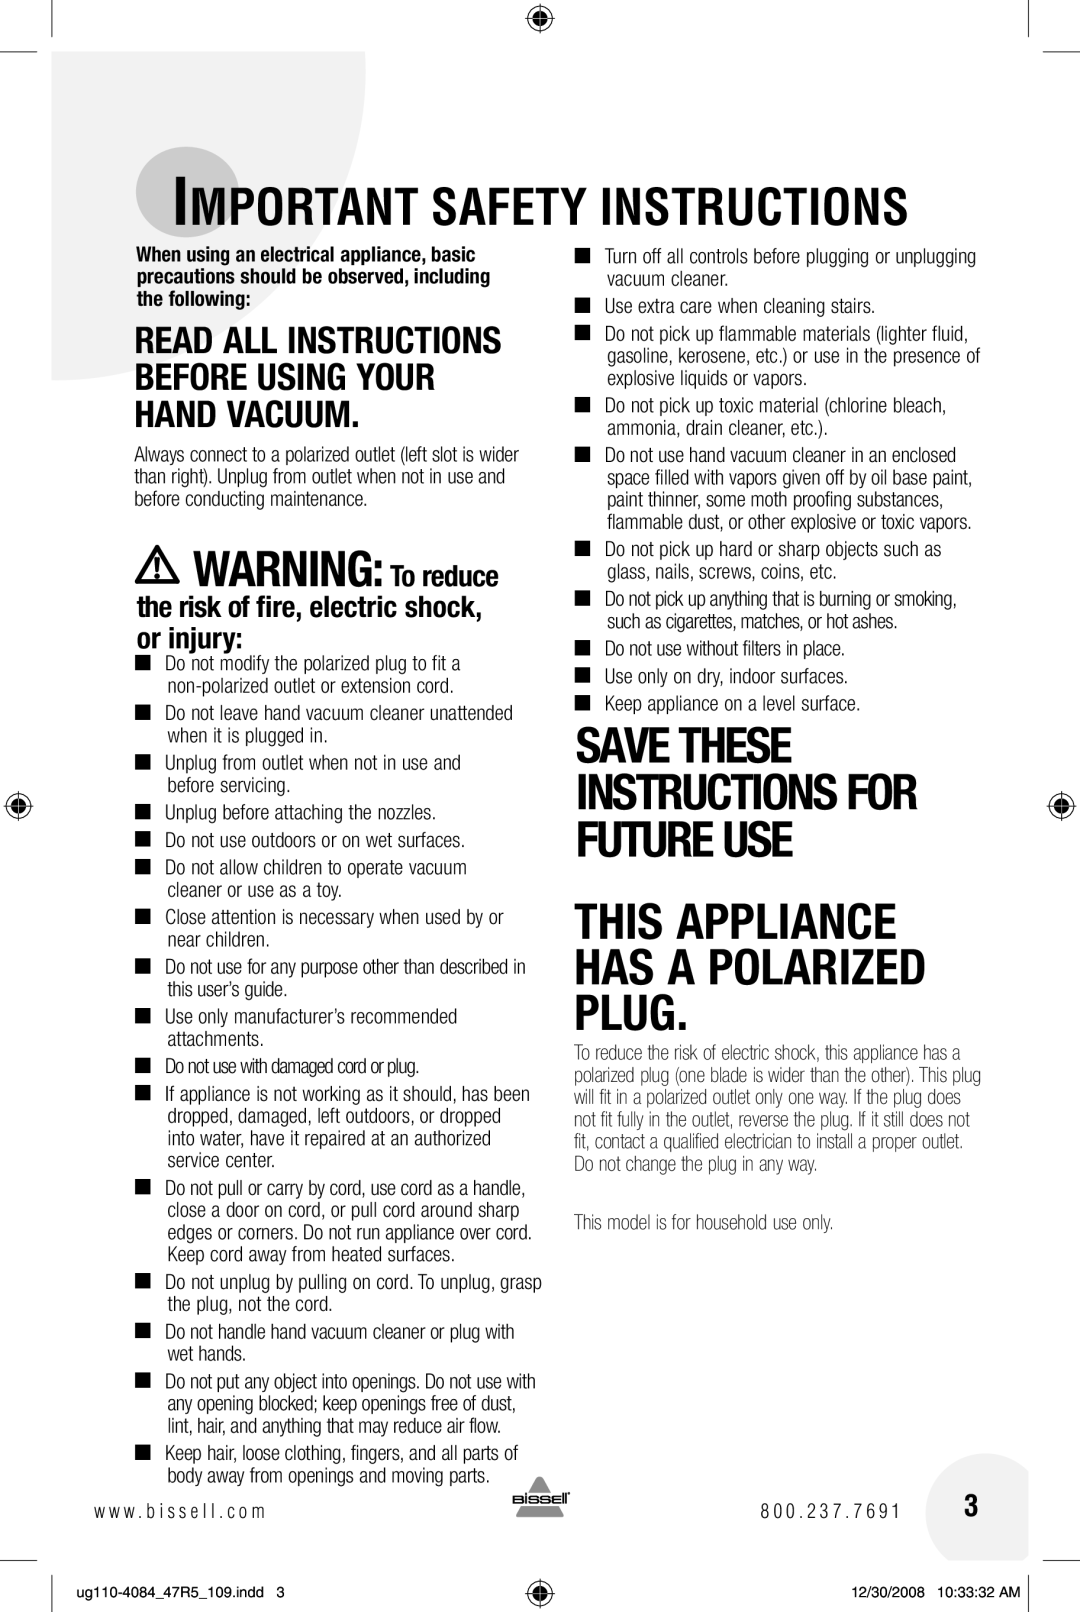 Bissell 47R5 warranty Read all instructions before using your HAND VACUUM, the risk of fire, electric shock, or injury 